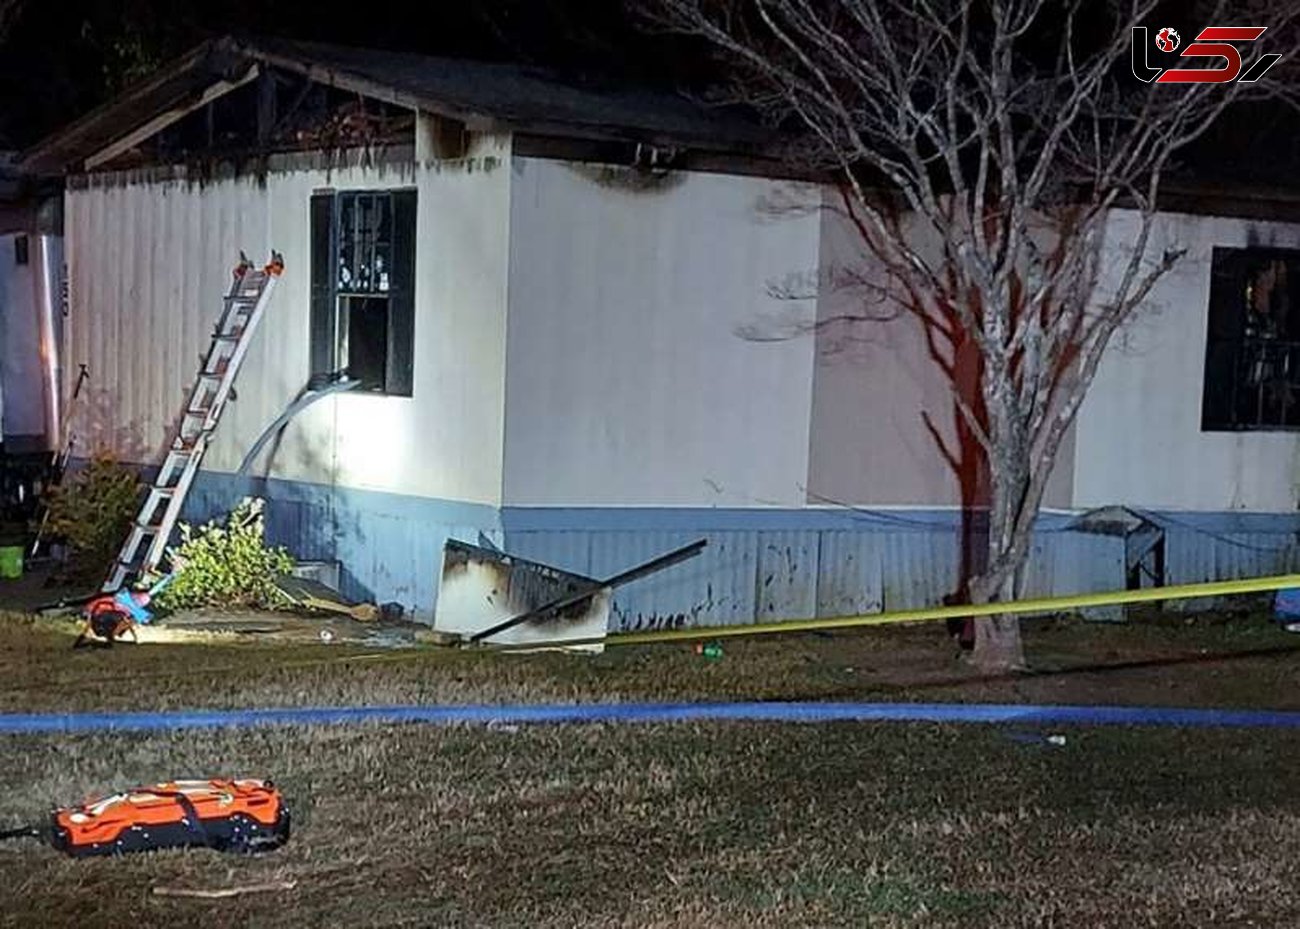 Family of 4, Including 3 Children, Killed in Georgia Mobile Home Fire
